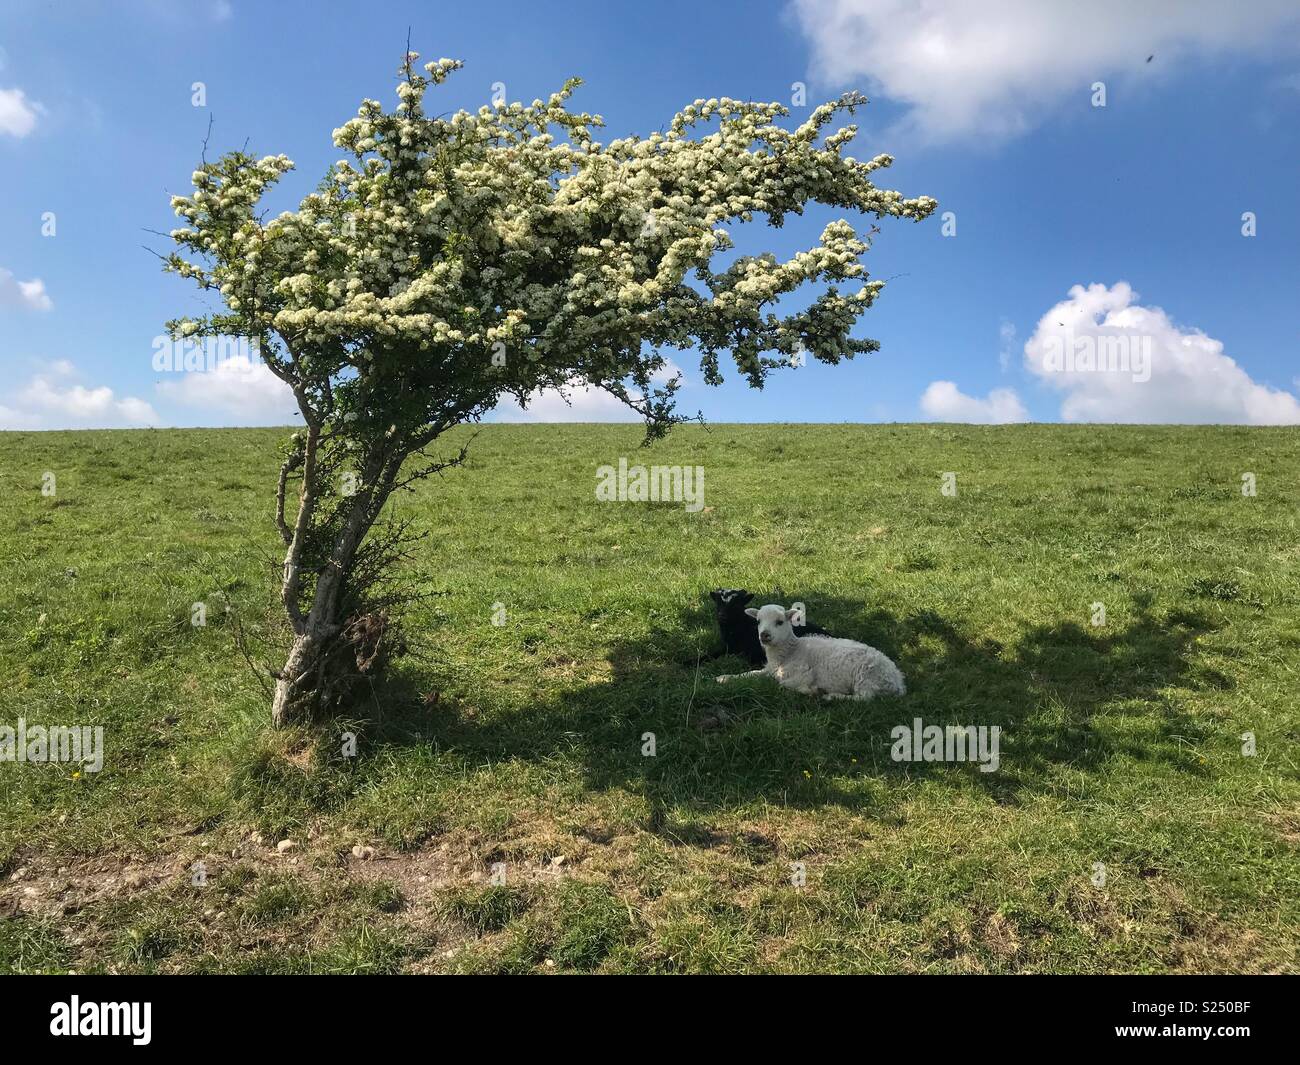 Two lambs taking shade under a tree Stock Photo